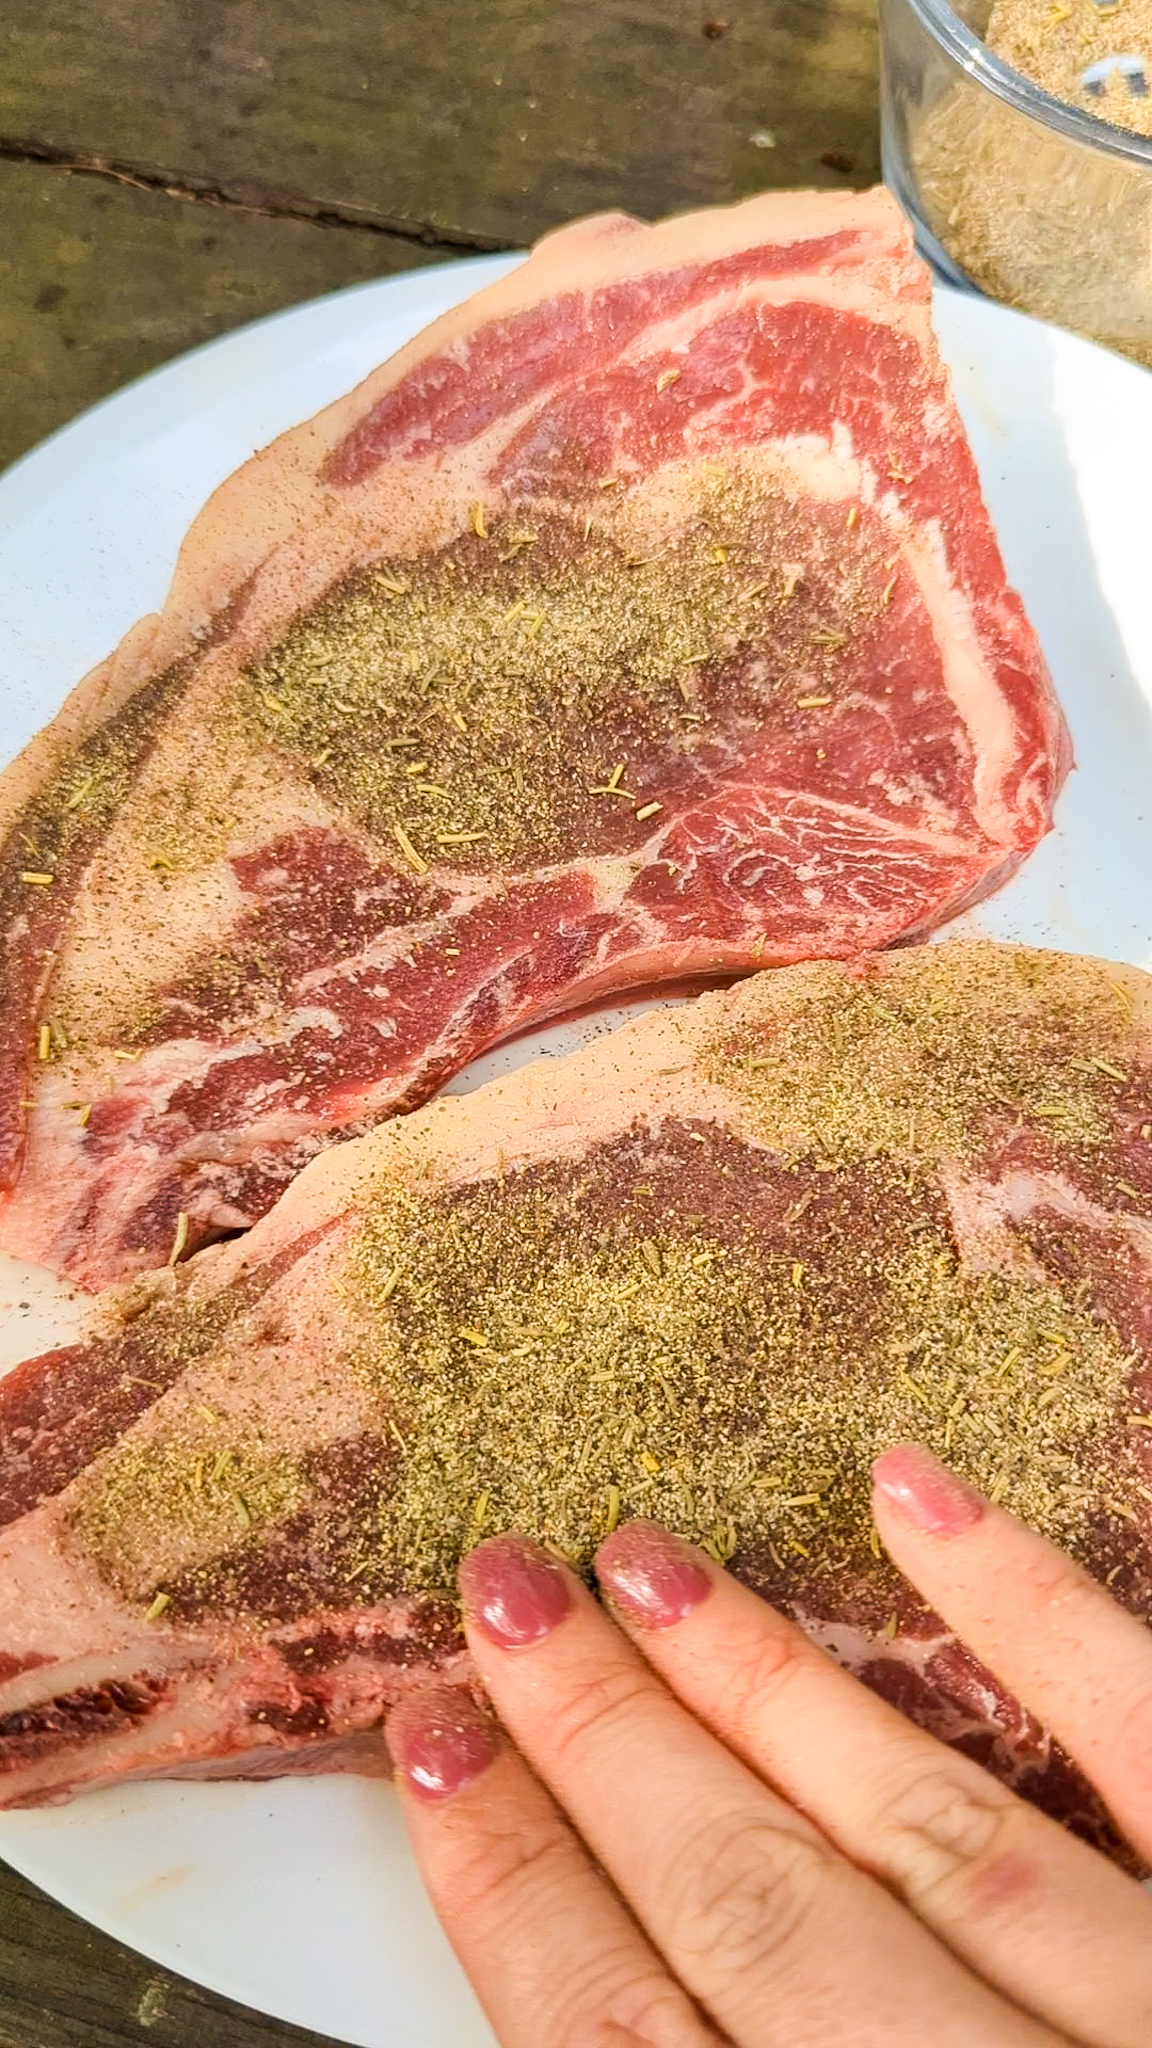 spice rub being applied to steaks